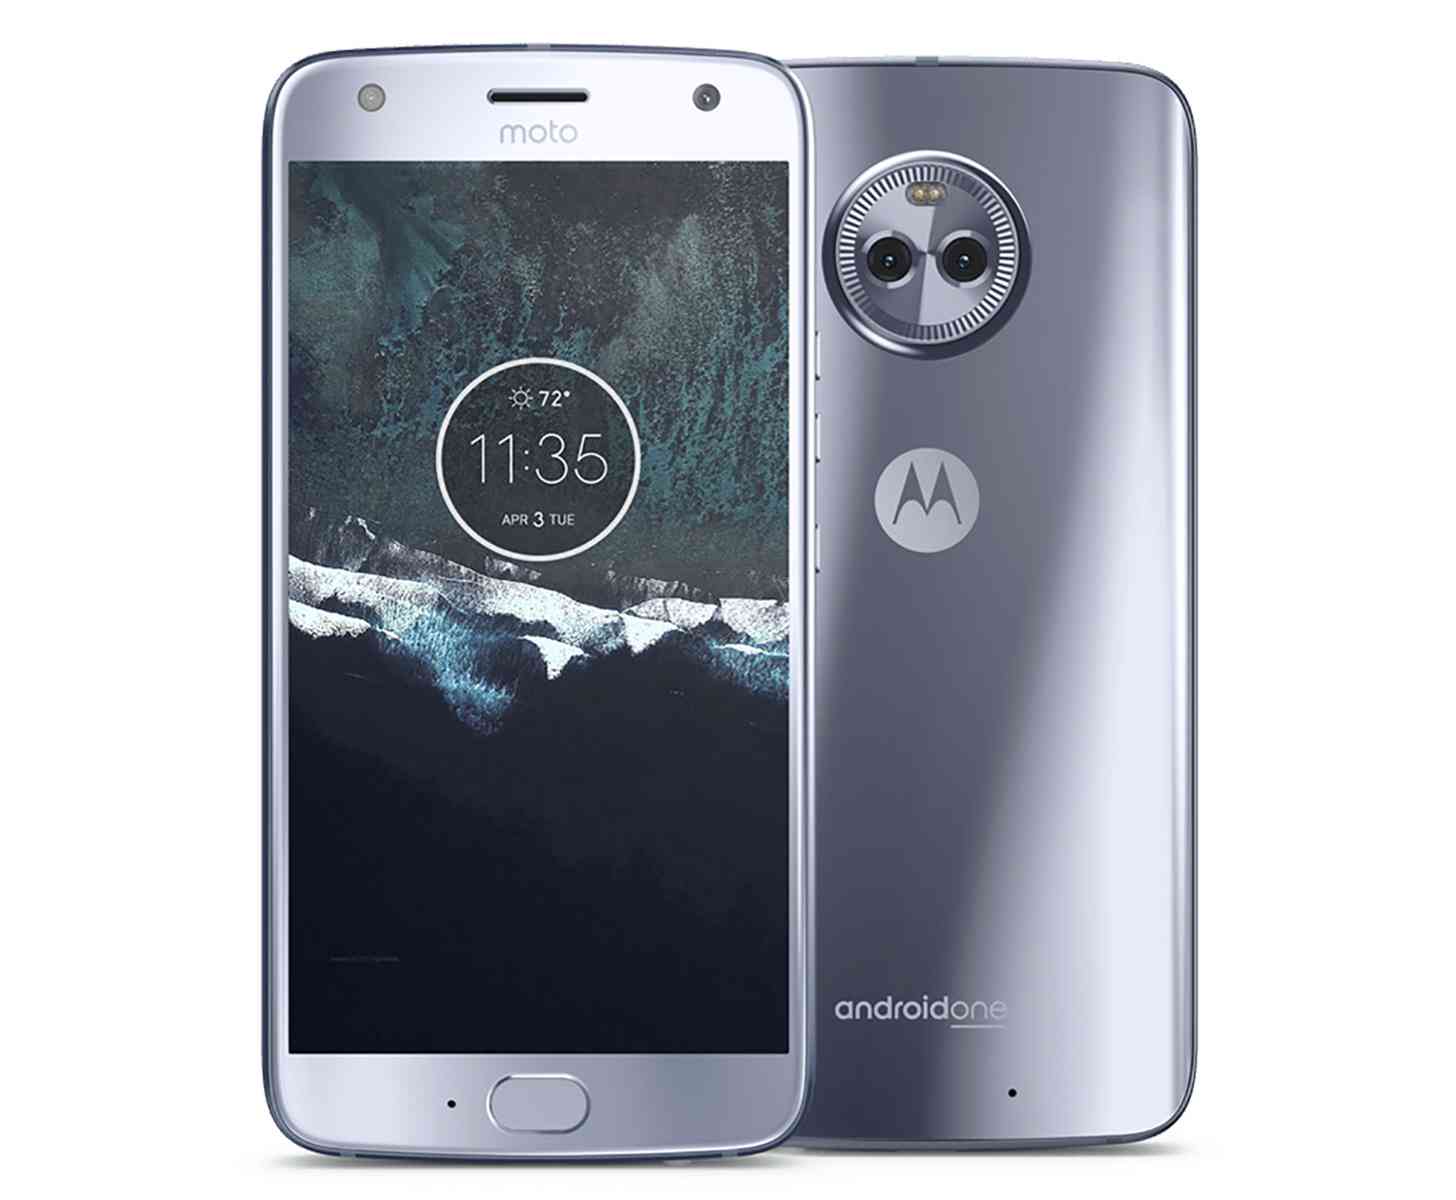 Android One Moto X4 official image